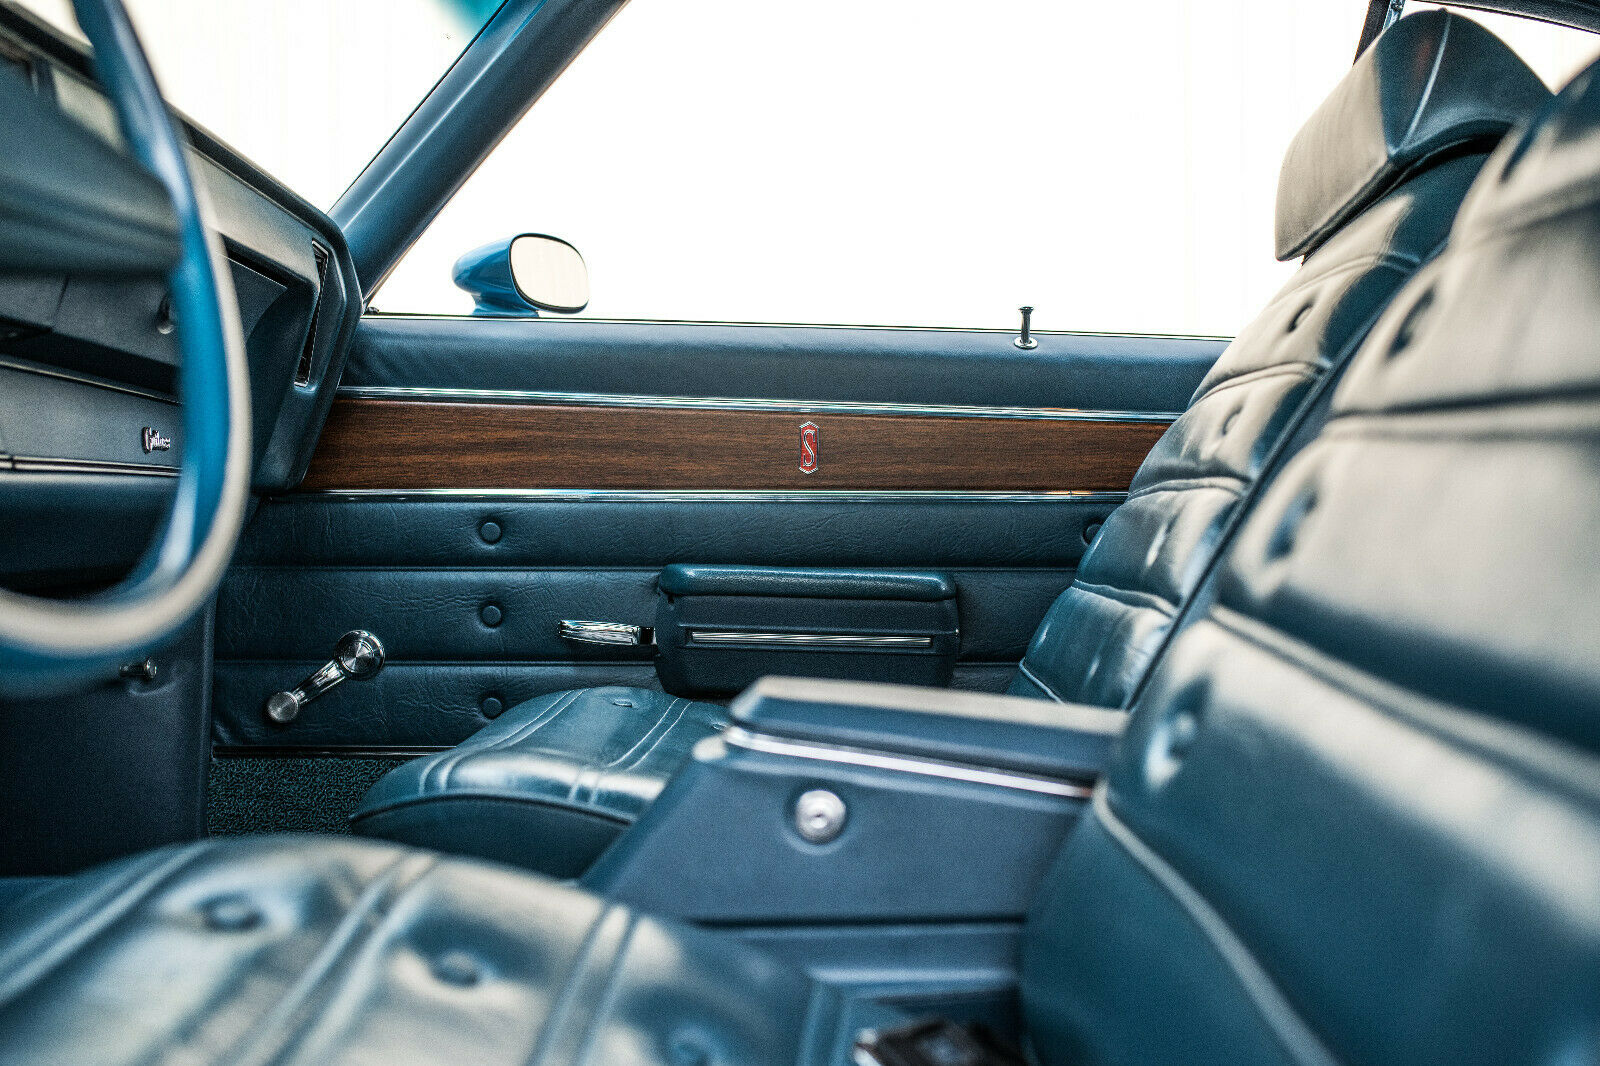 The interior is indistinguishable from new